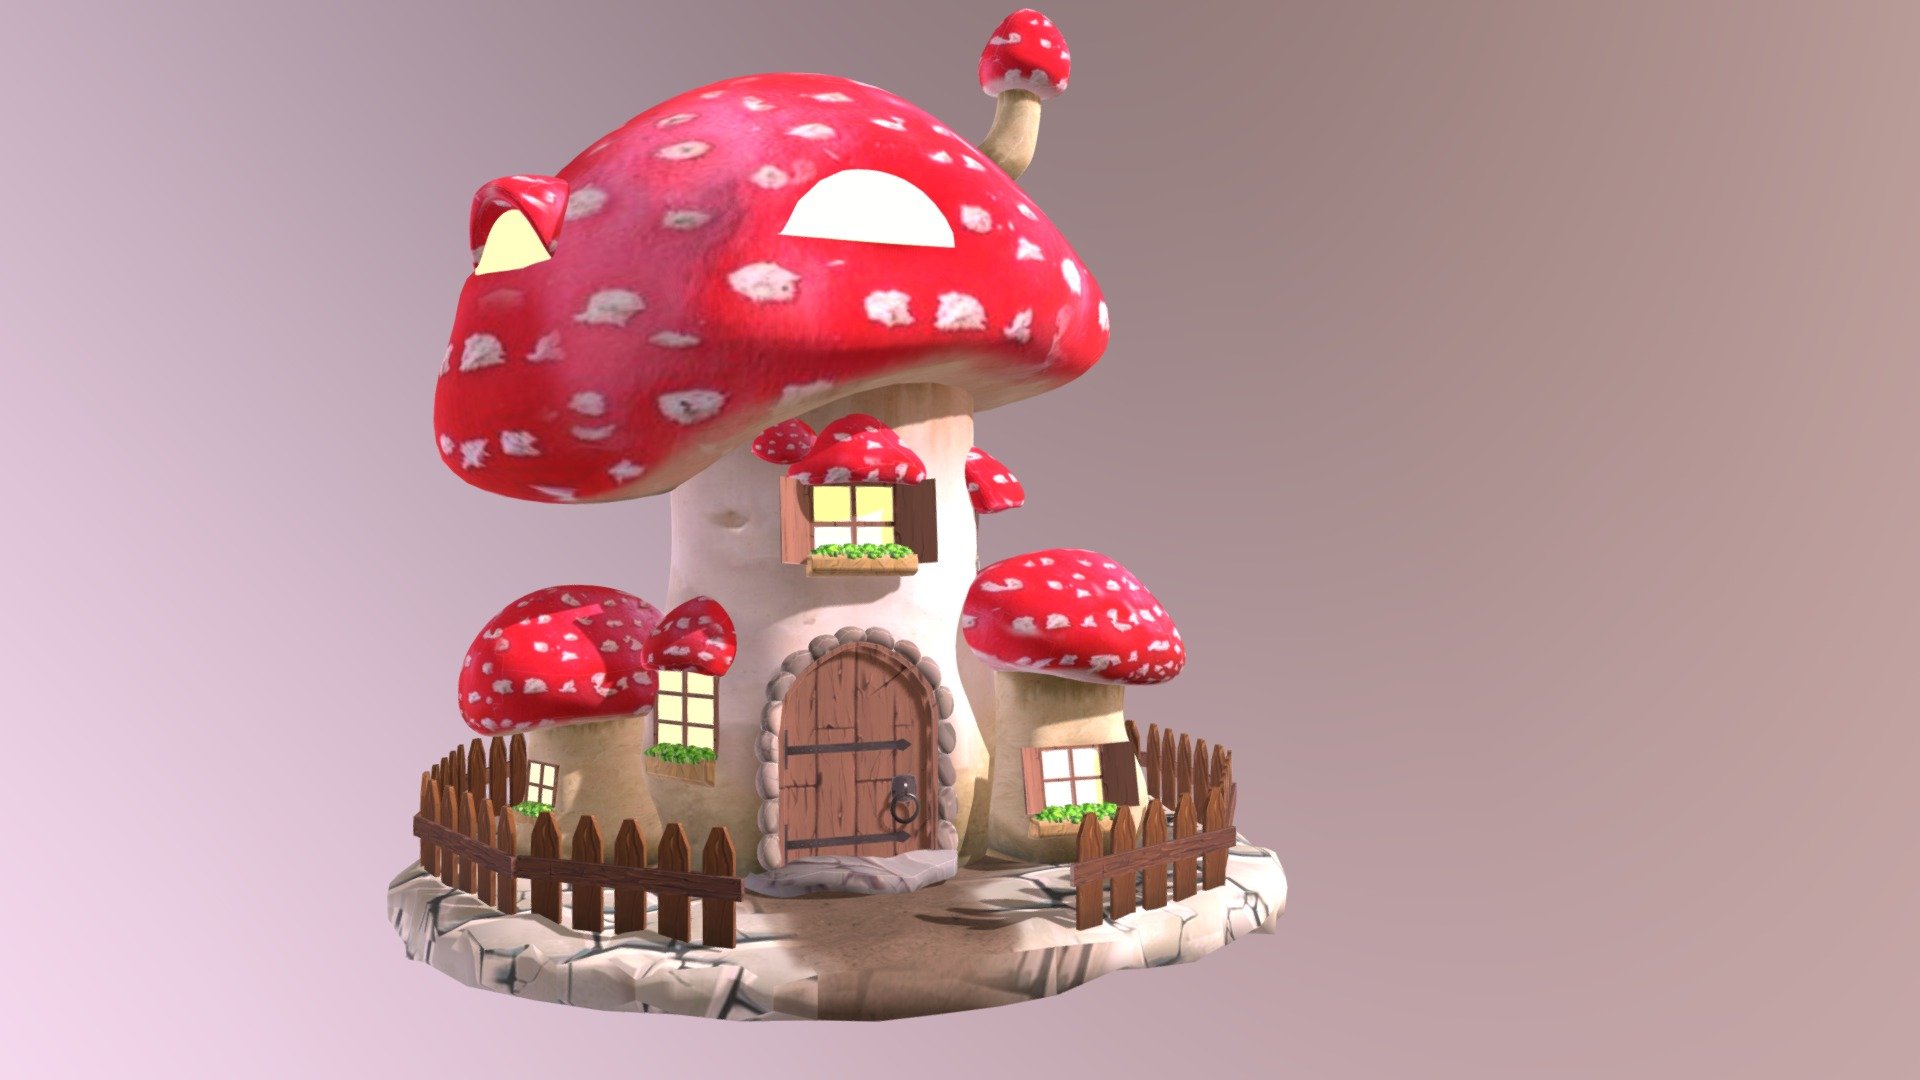 Muschroom house//toadstool
three muschroom with window and flowers! - Muschroom house//toadstool - Download Free 3D model by werxxiks 3d model